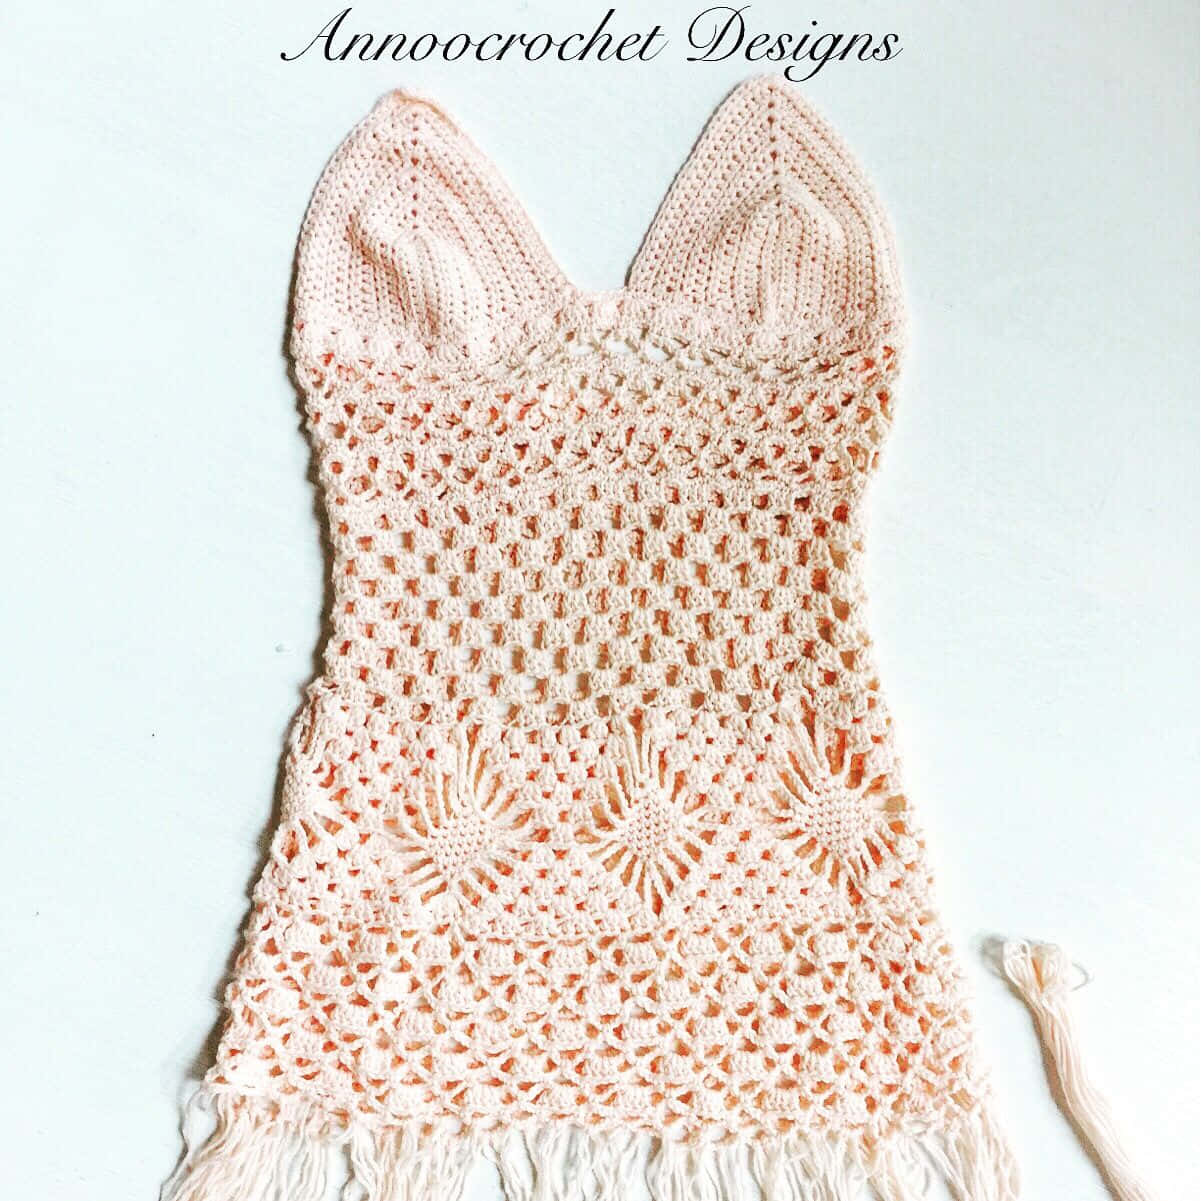 A Crocheted Dress With Fringes And A Crocheted Lace